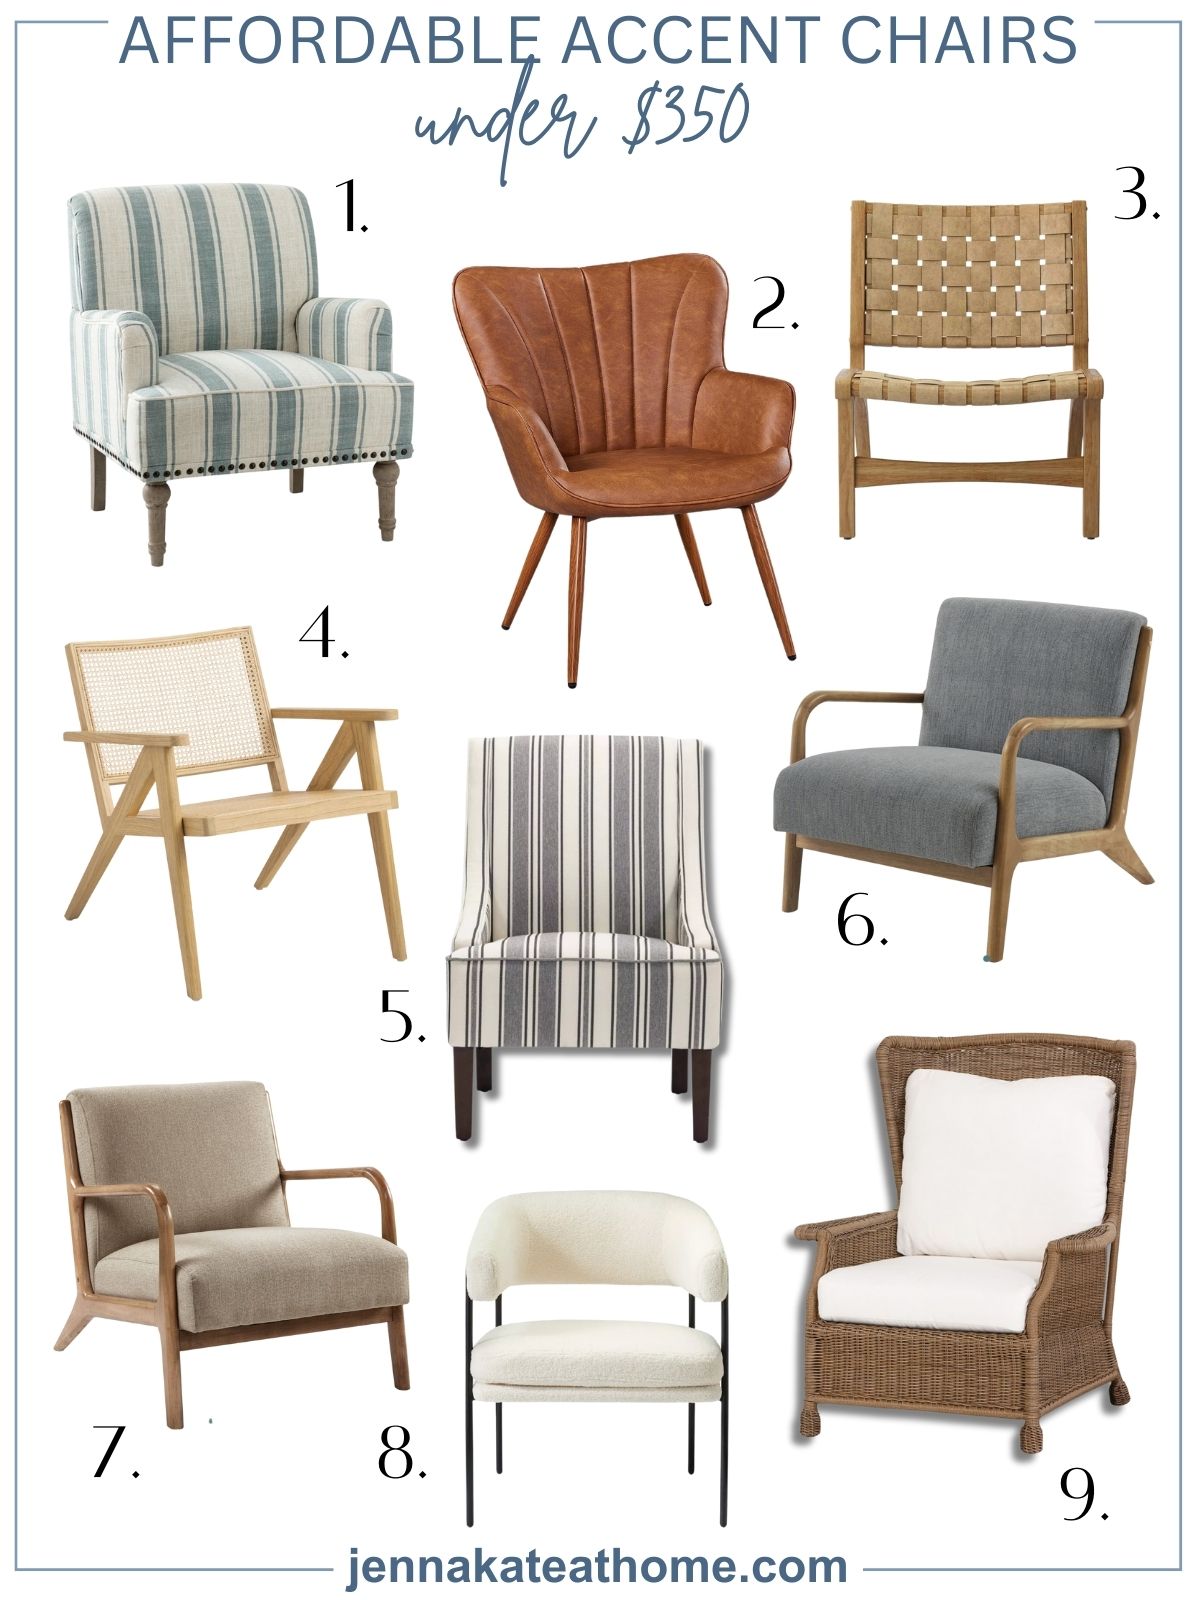 a collage of my favorite affordable accent chairs under $350